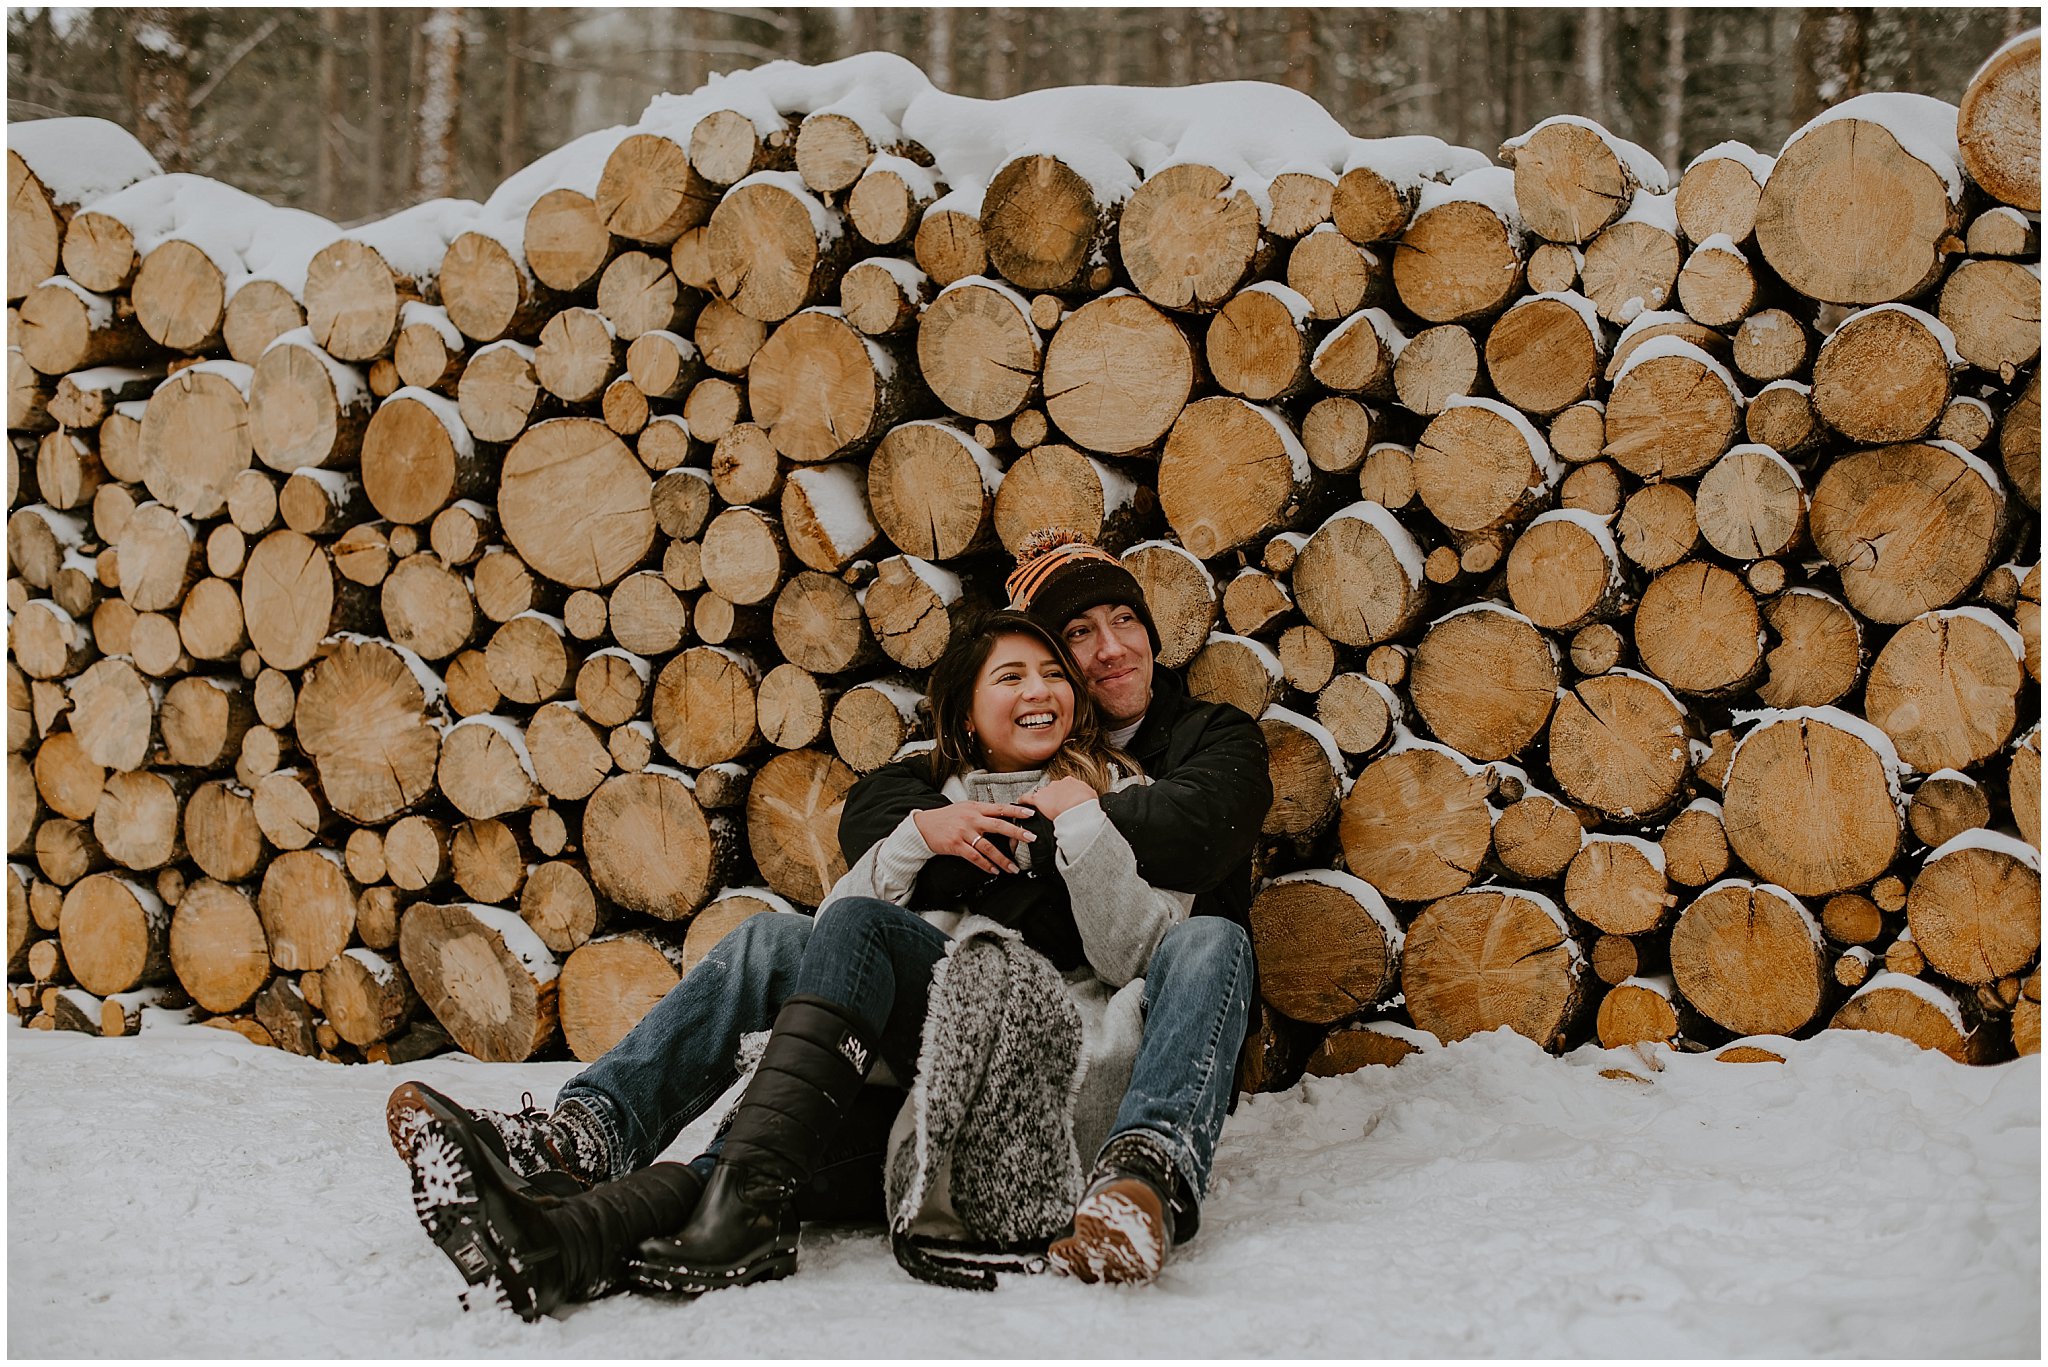 Newly engaged couple embraces in Breckenridge for portraits in the snow